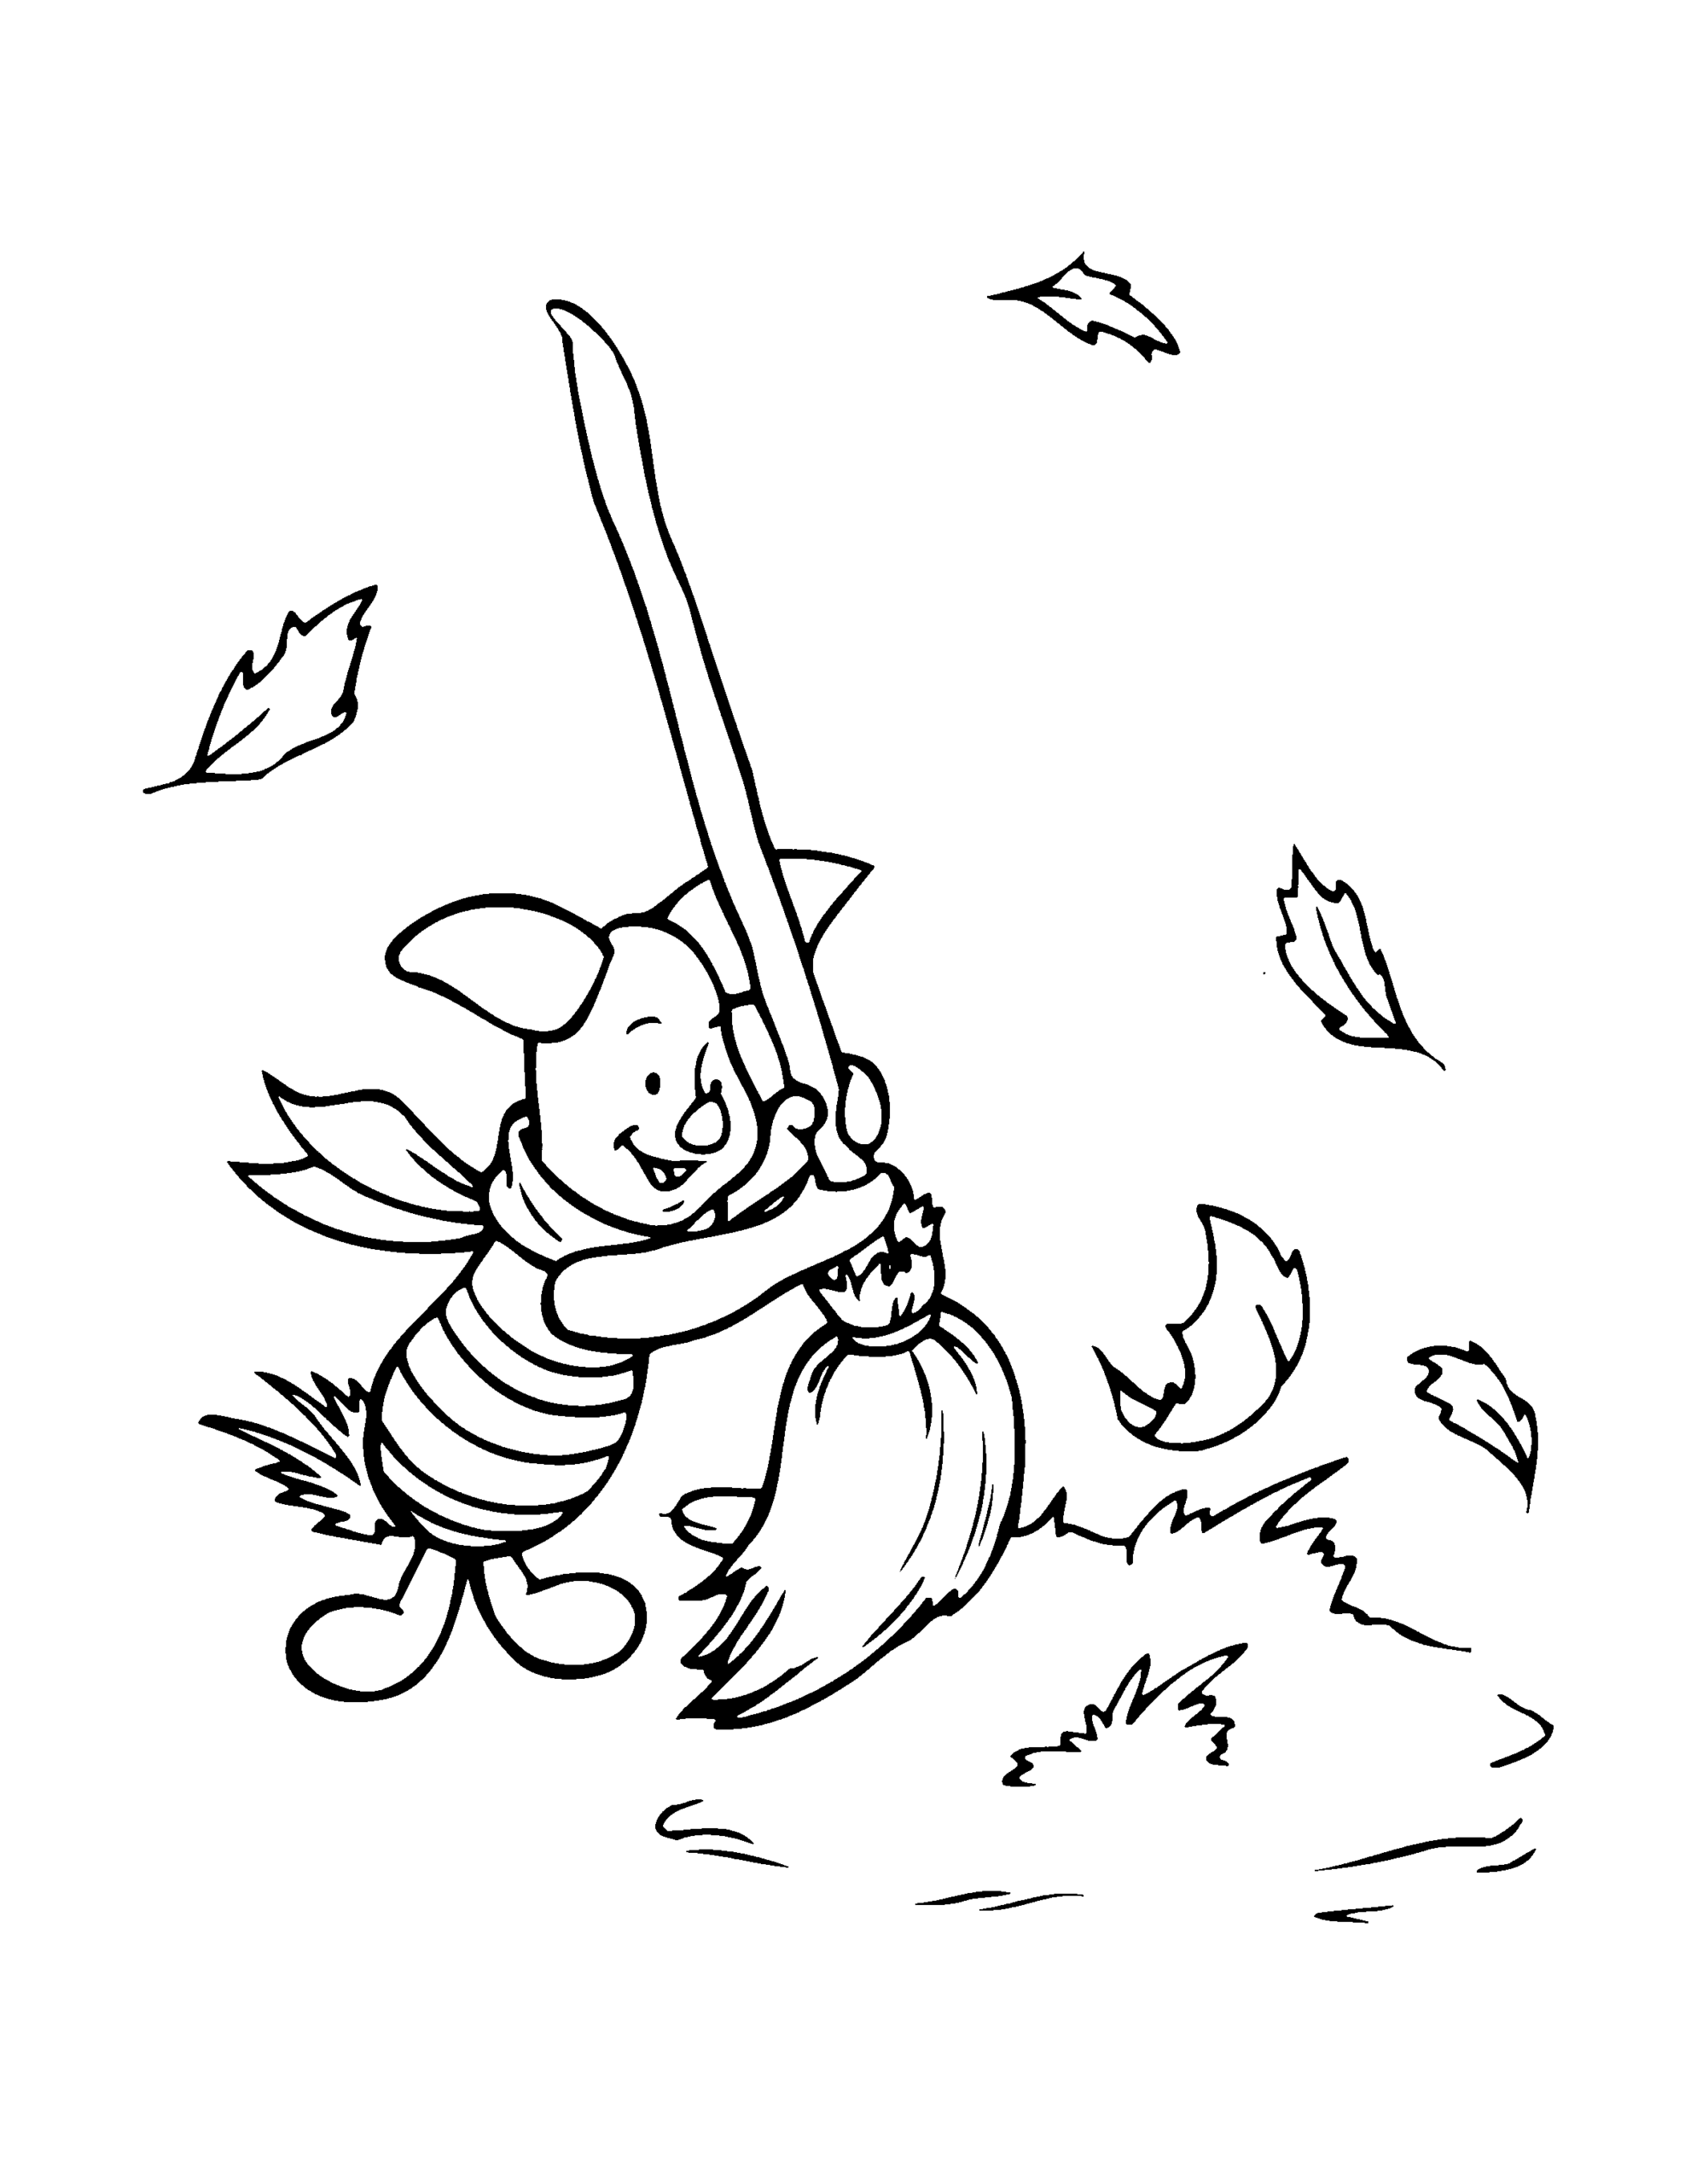 Winnie the Pooh Coloring Pages Cartoons winnie the pooh 97 Printable 2020 7220 Coloring4free